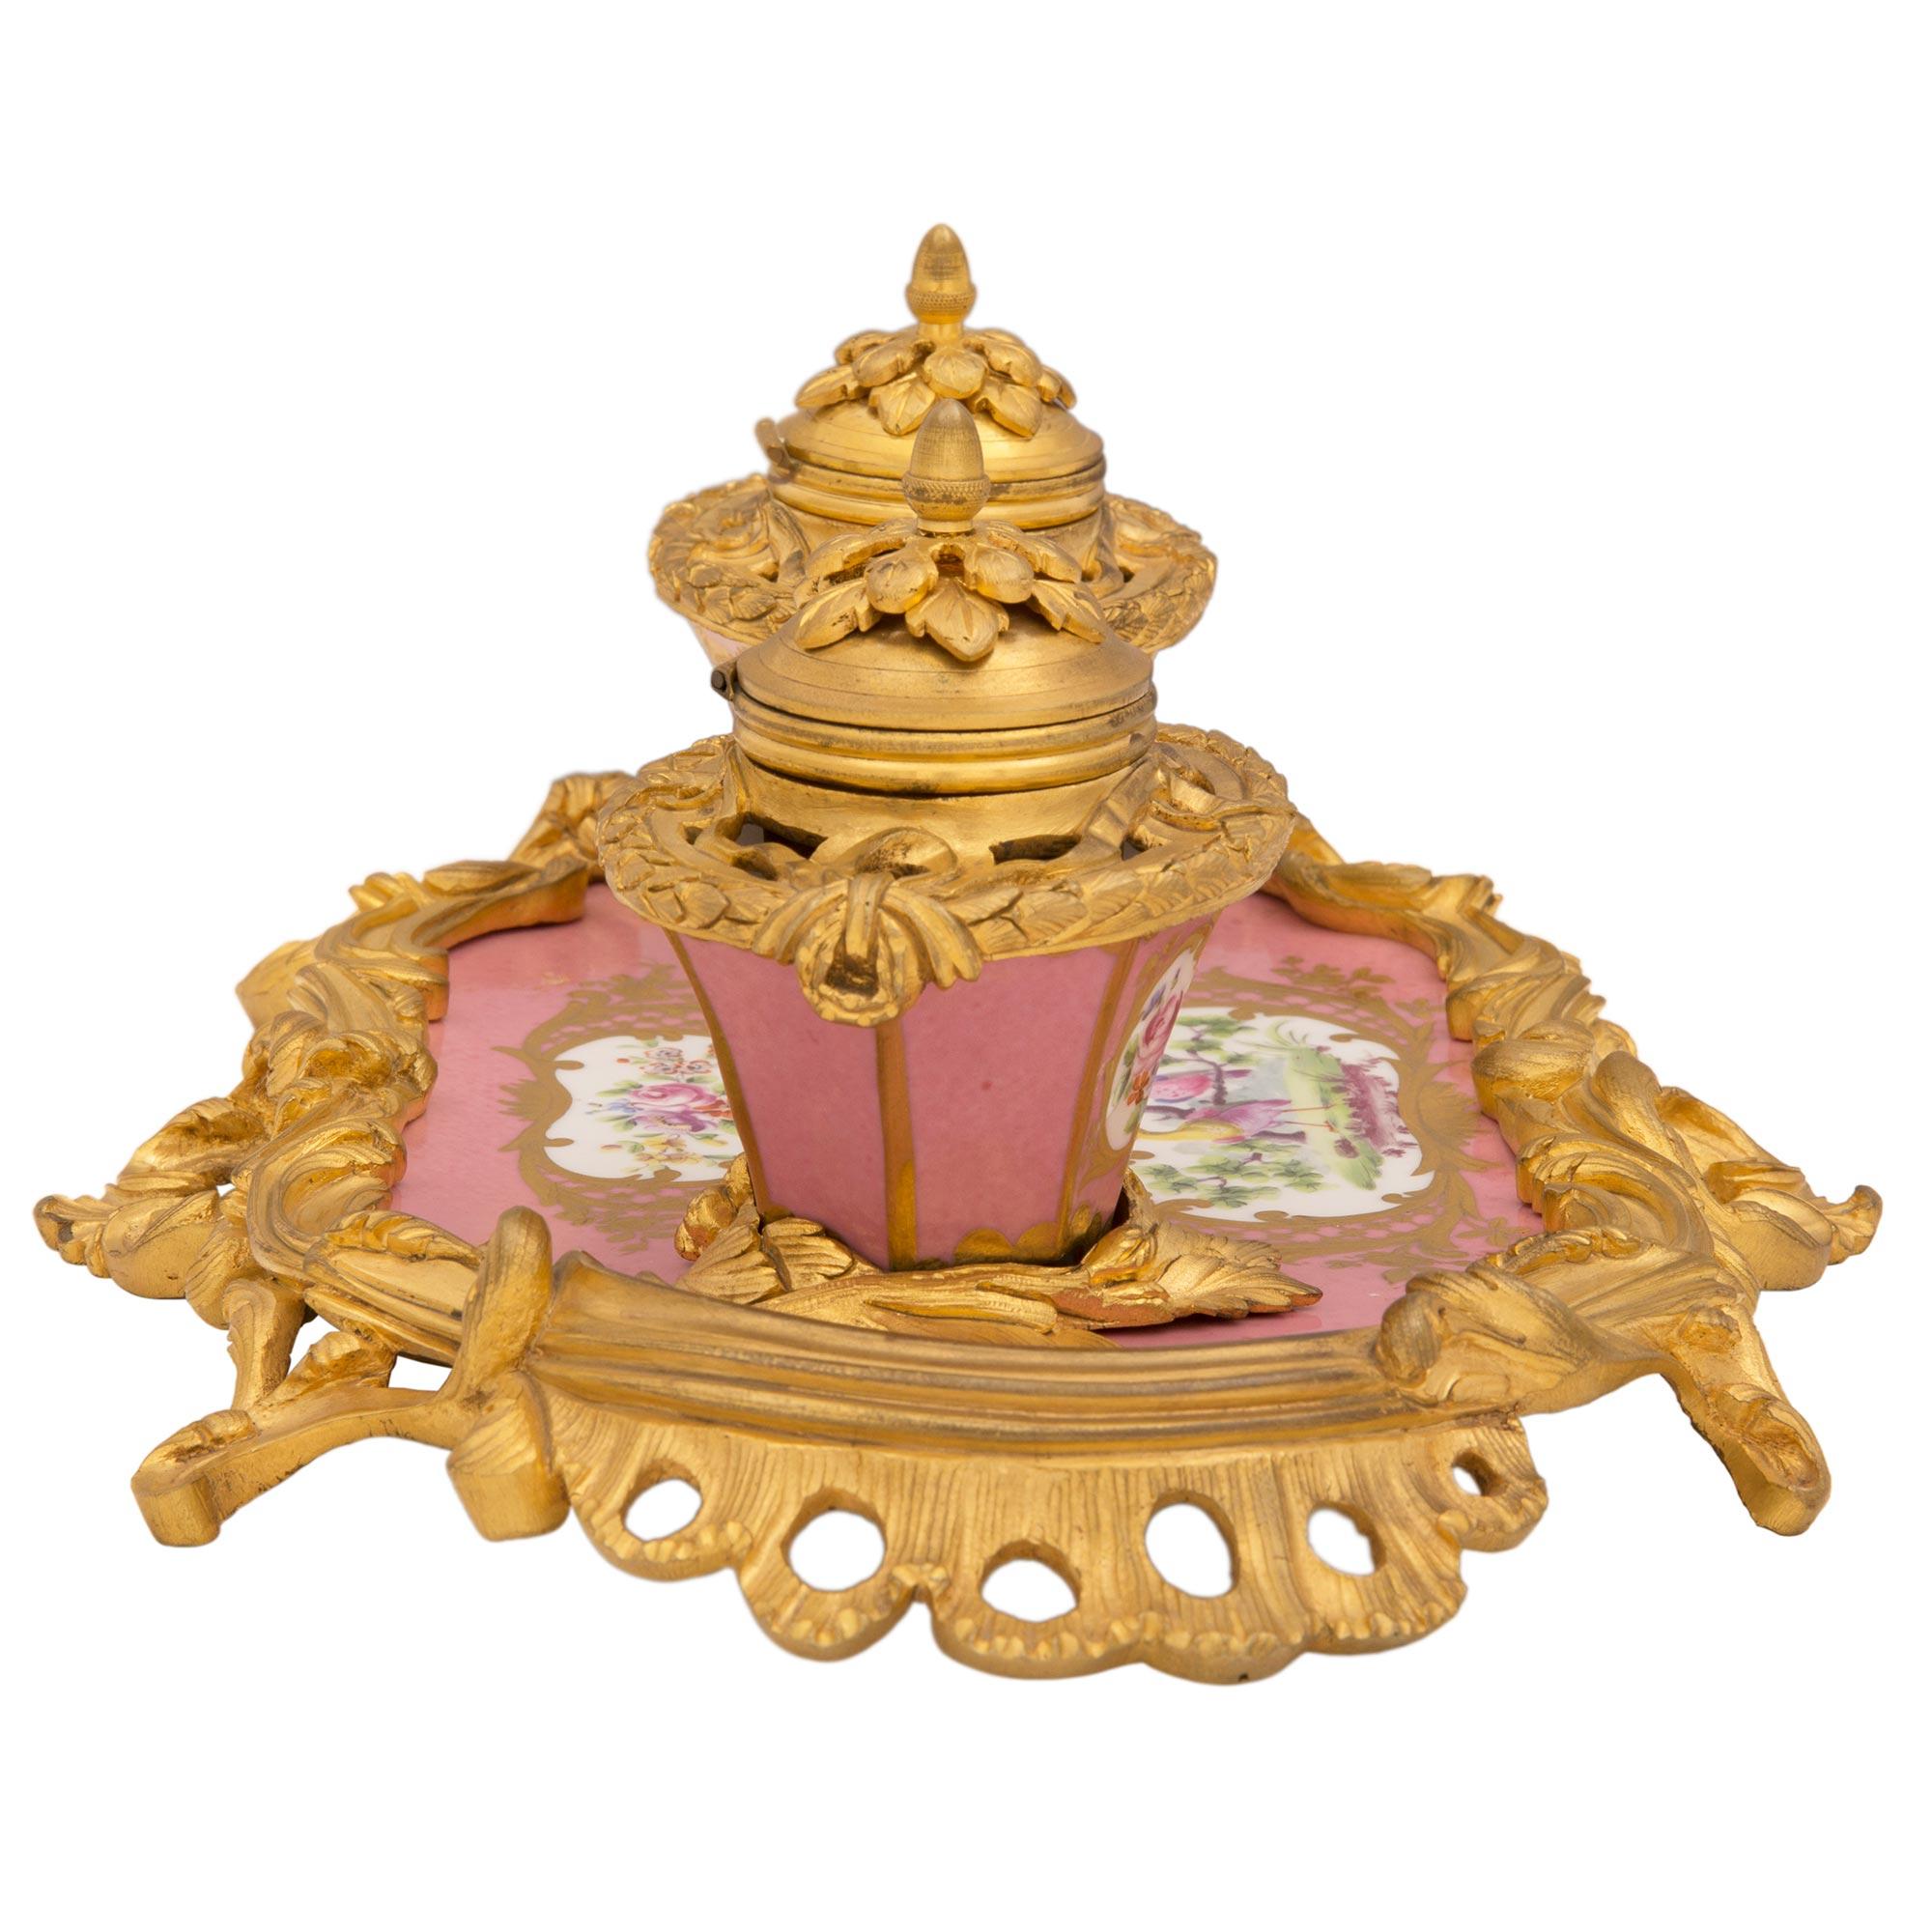  French Early 19th Century Louis XV St. Sèvres Porcelain and Ormolu Inkwell For Sale 1